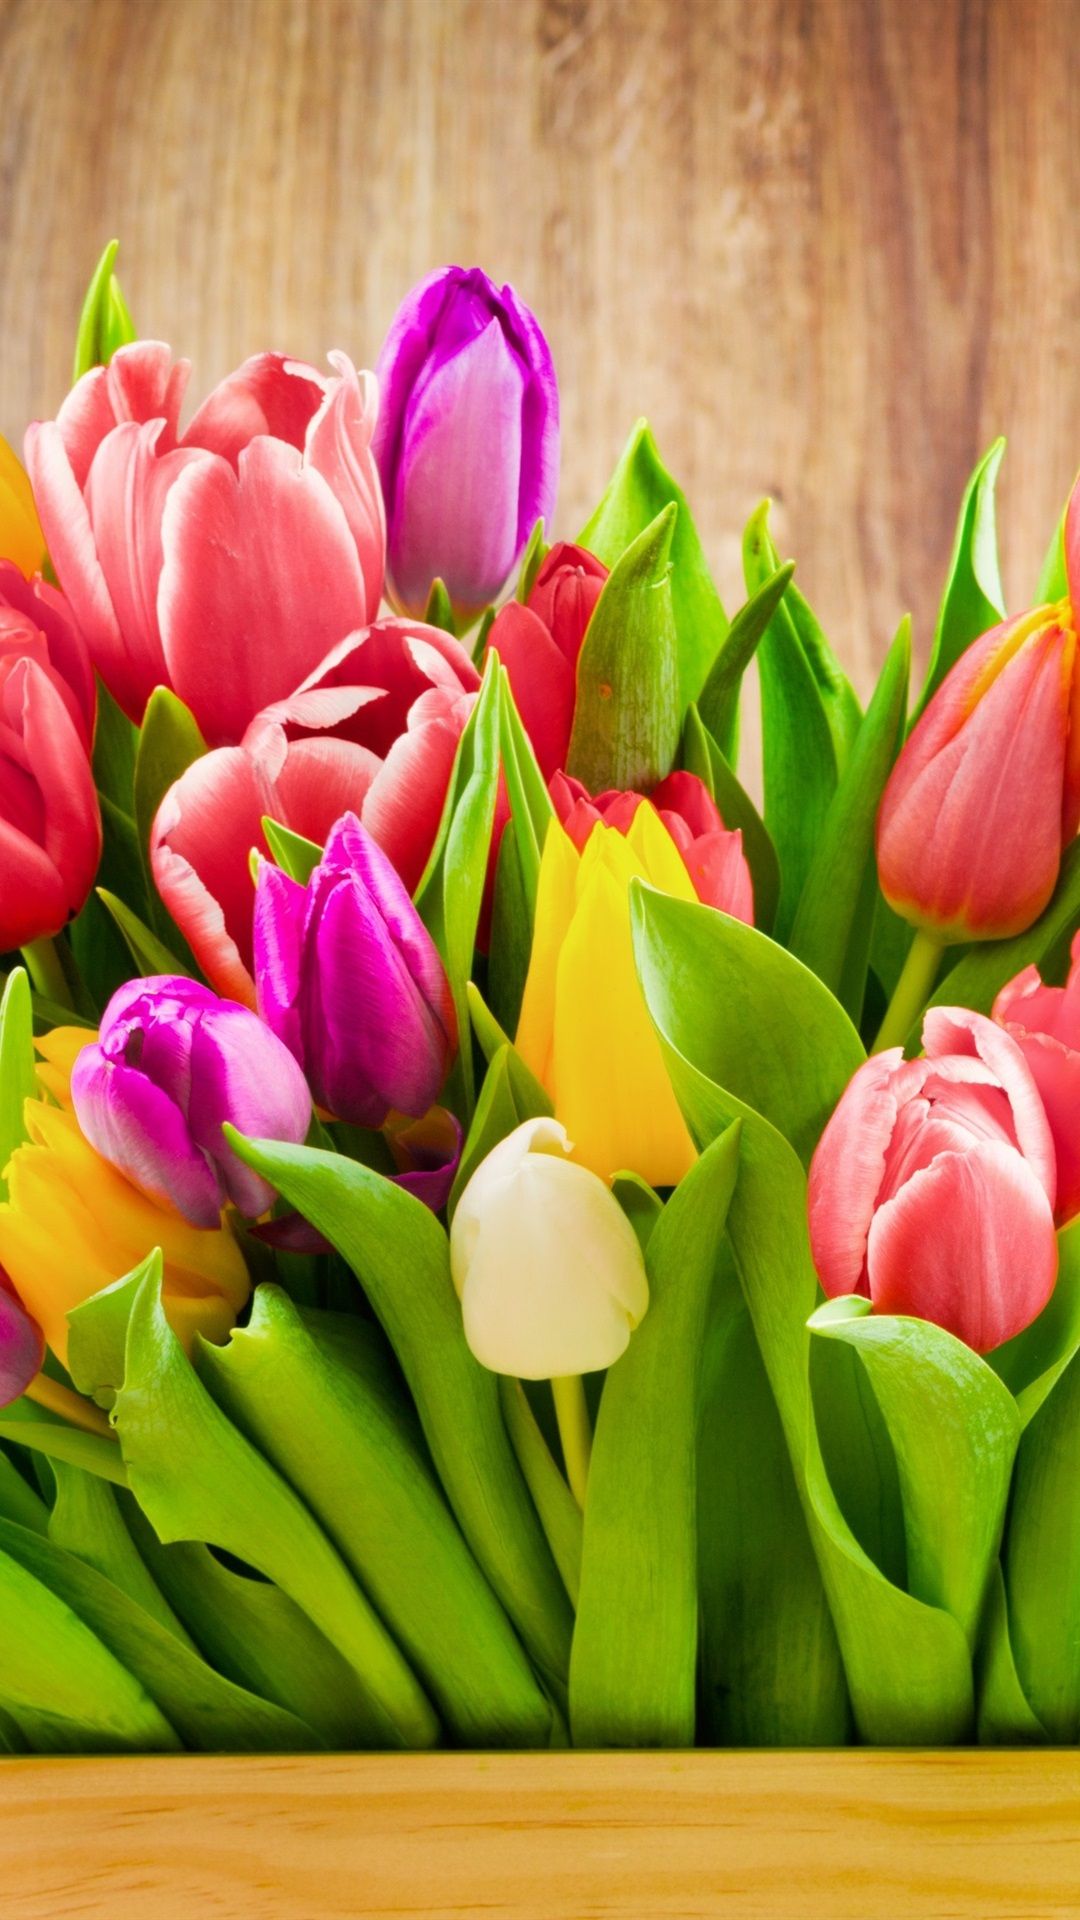 Many Colorful Tulips Flowers, Box 1080x1920 IPhone 8 7 6 6S Plus